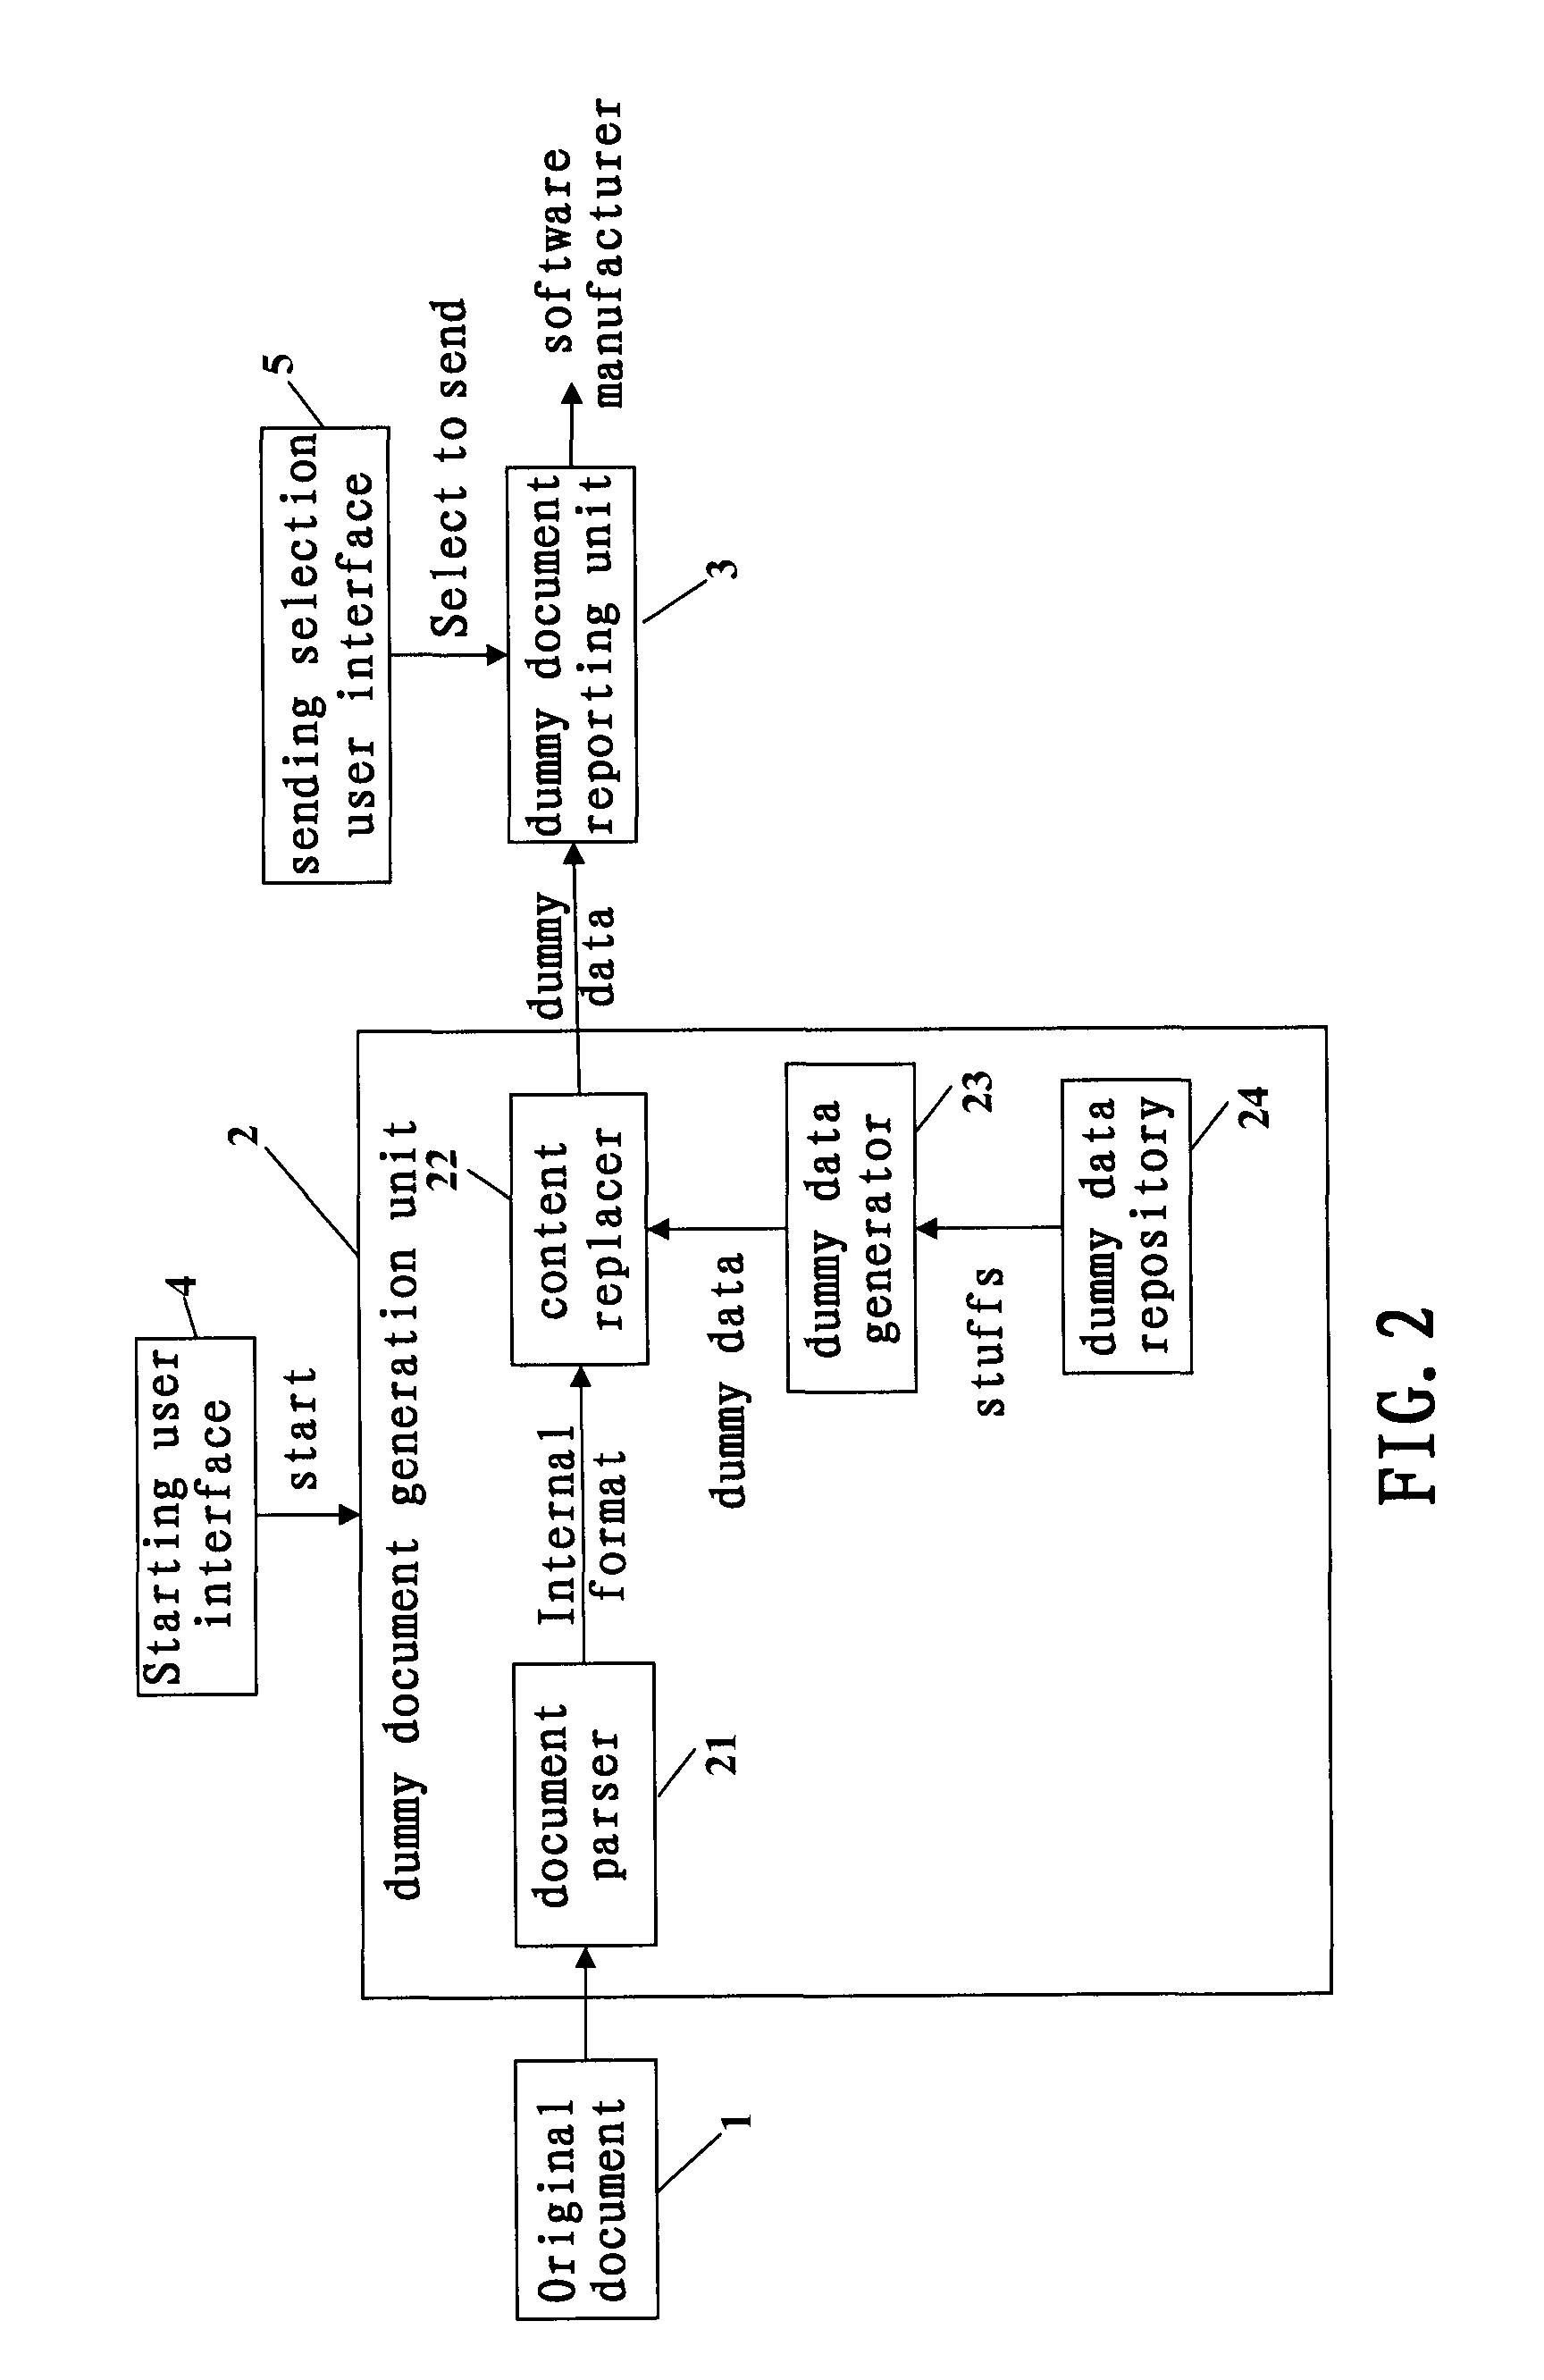 System and method for error reporting in software applications